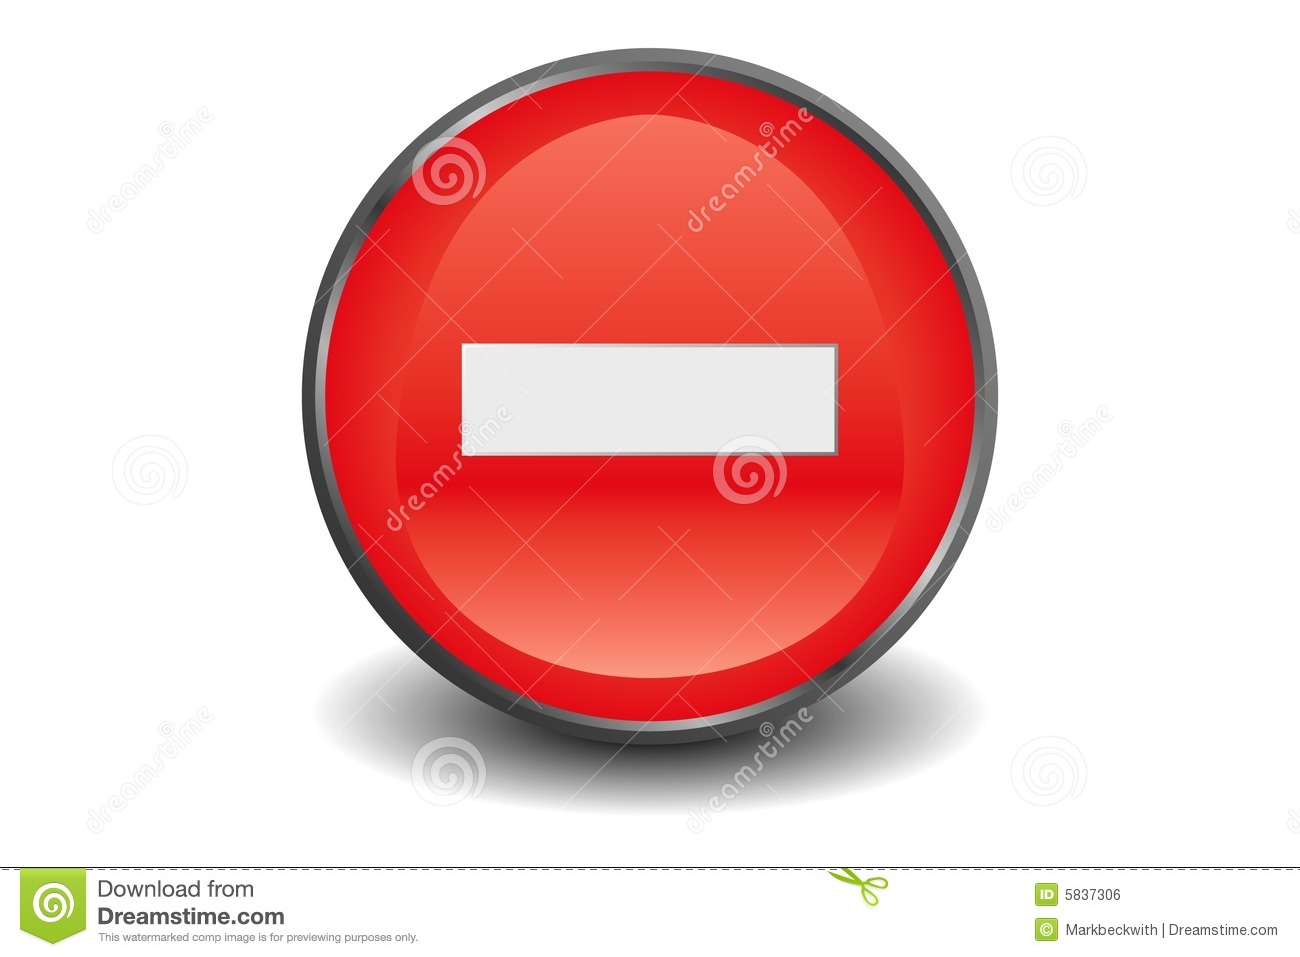 No Entry Button Royalty Free Stock Image   Image  5837306